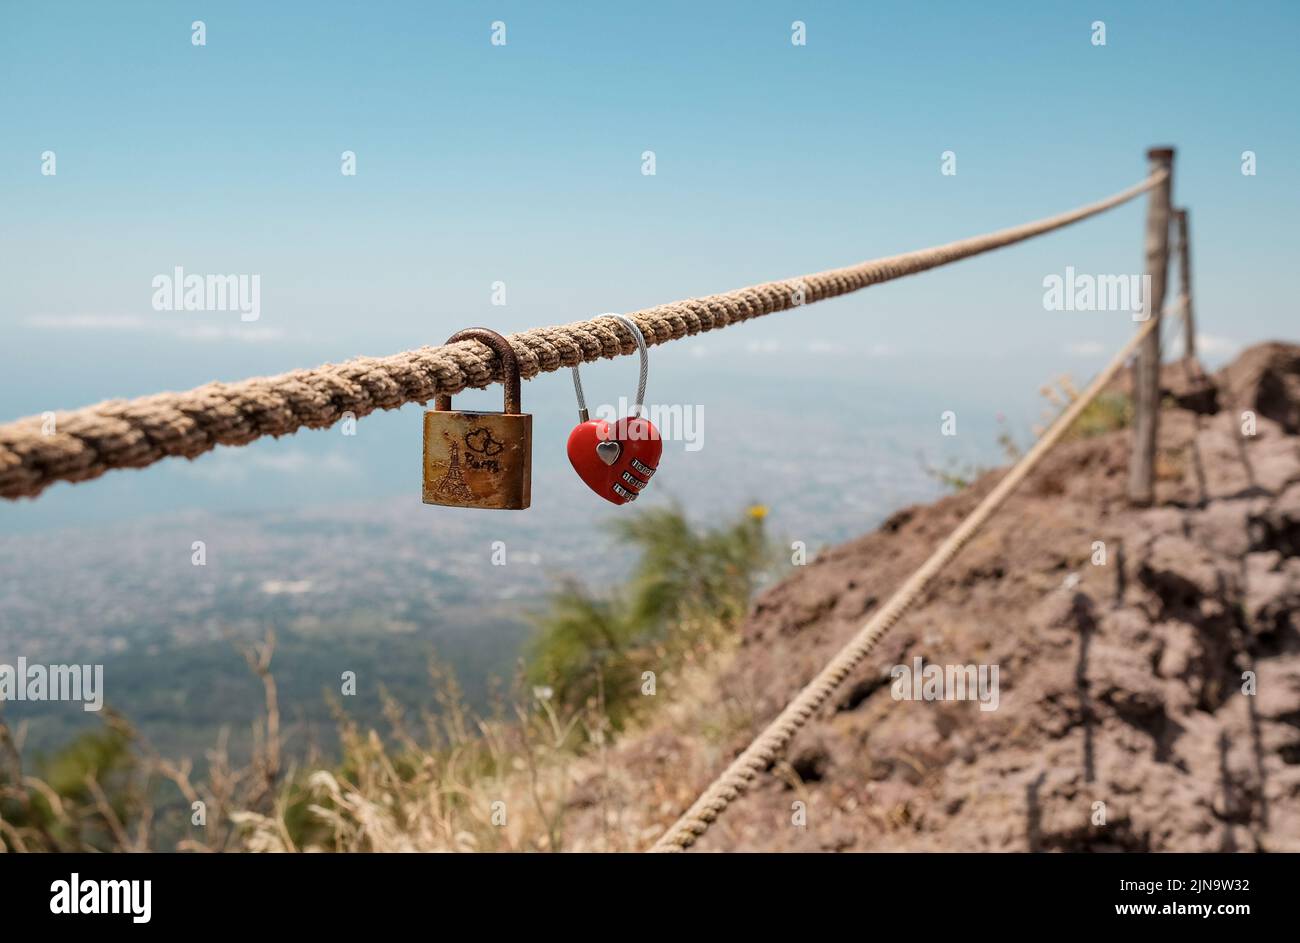 Love locked padlocks on the rope protecting you from the drop at Mount Vesuvius Volcano in Italy. The padlock at the front has Paris Eiffel Tower on. Stock Photo